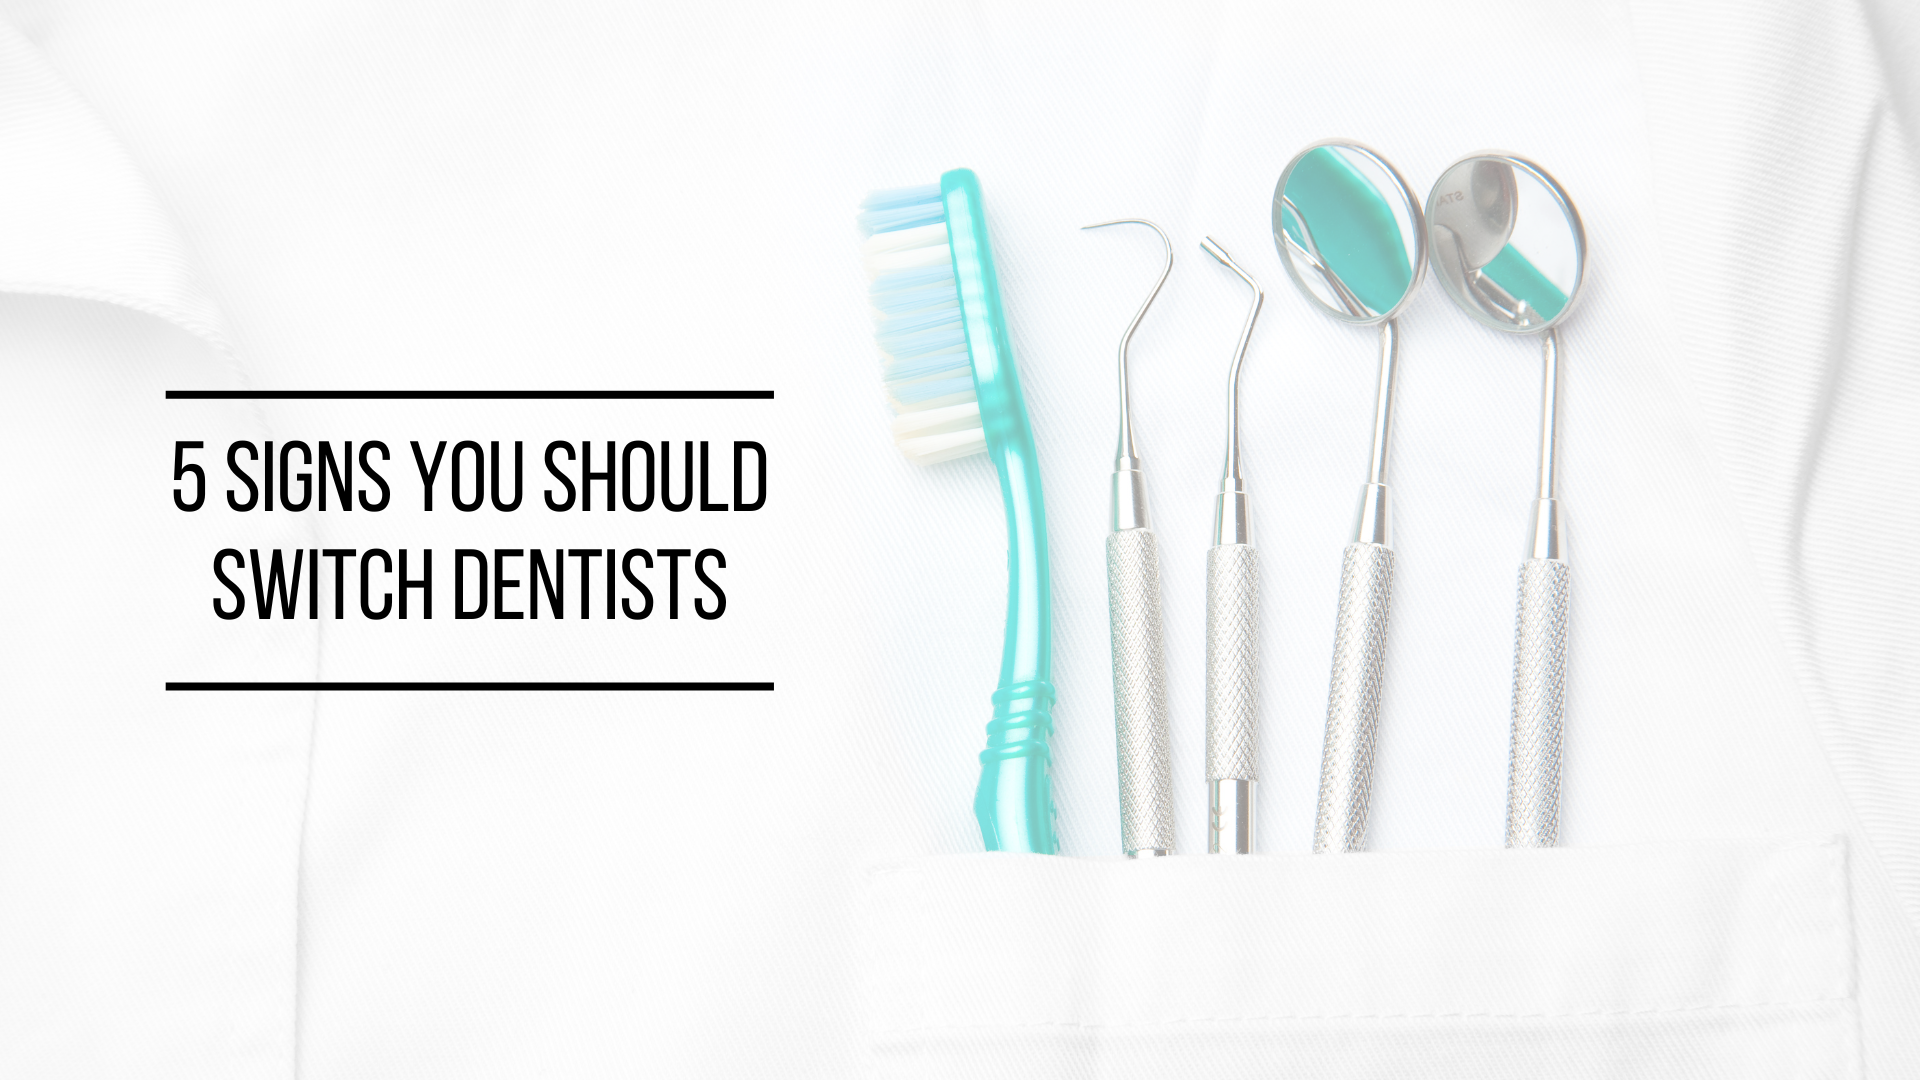 5 Signs You Should Switch Dentists